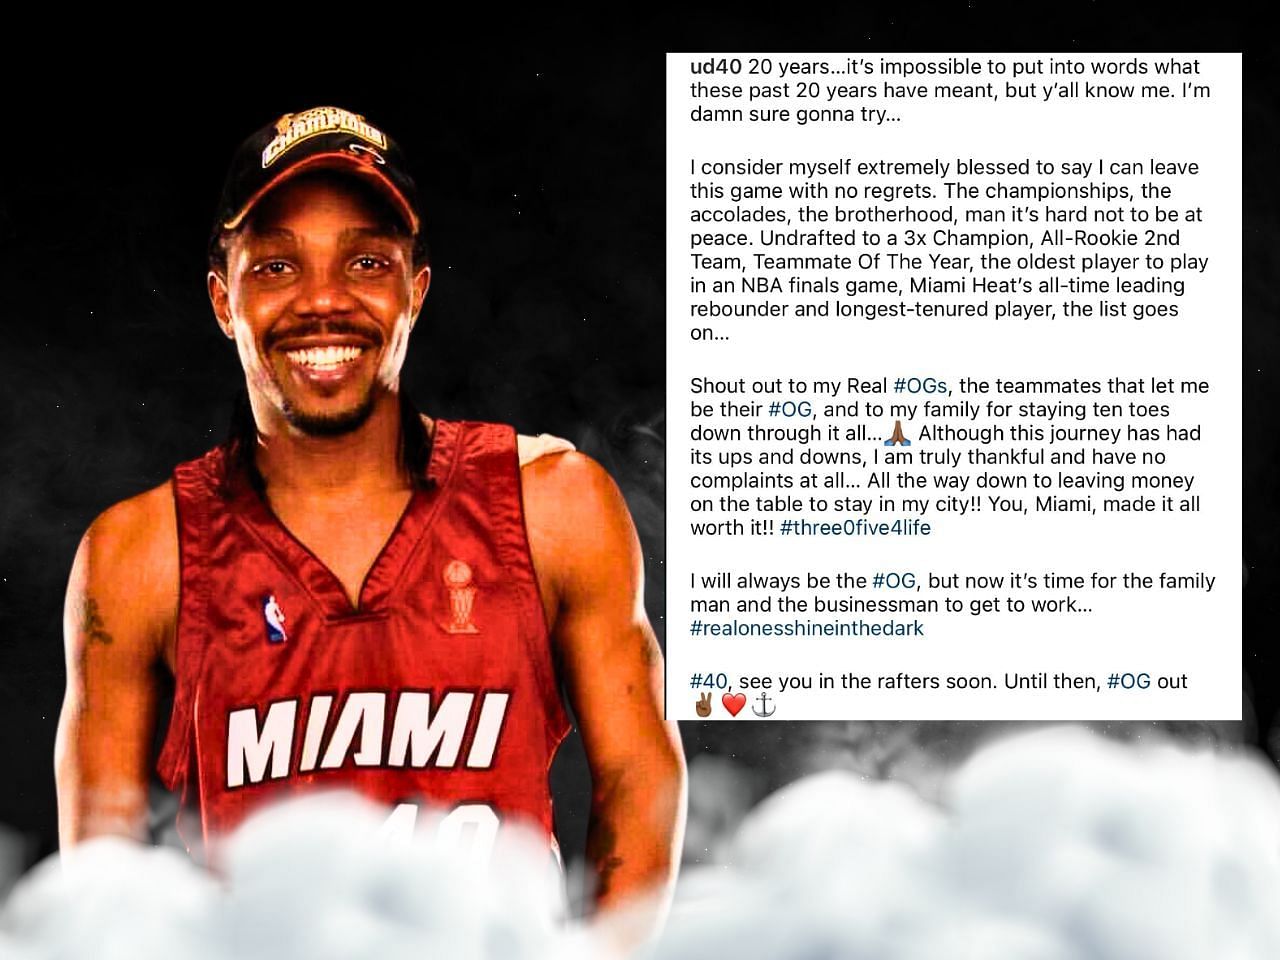 Udonis Haslem announces retirement after 20 seasons with Heat